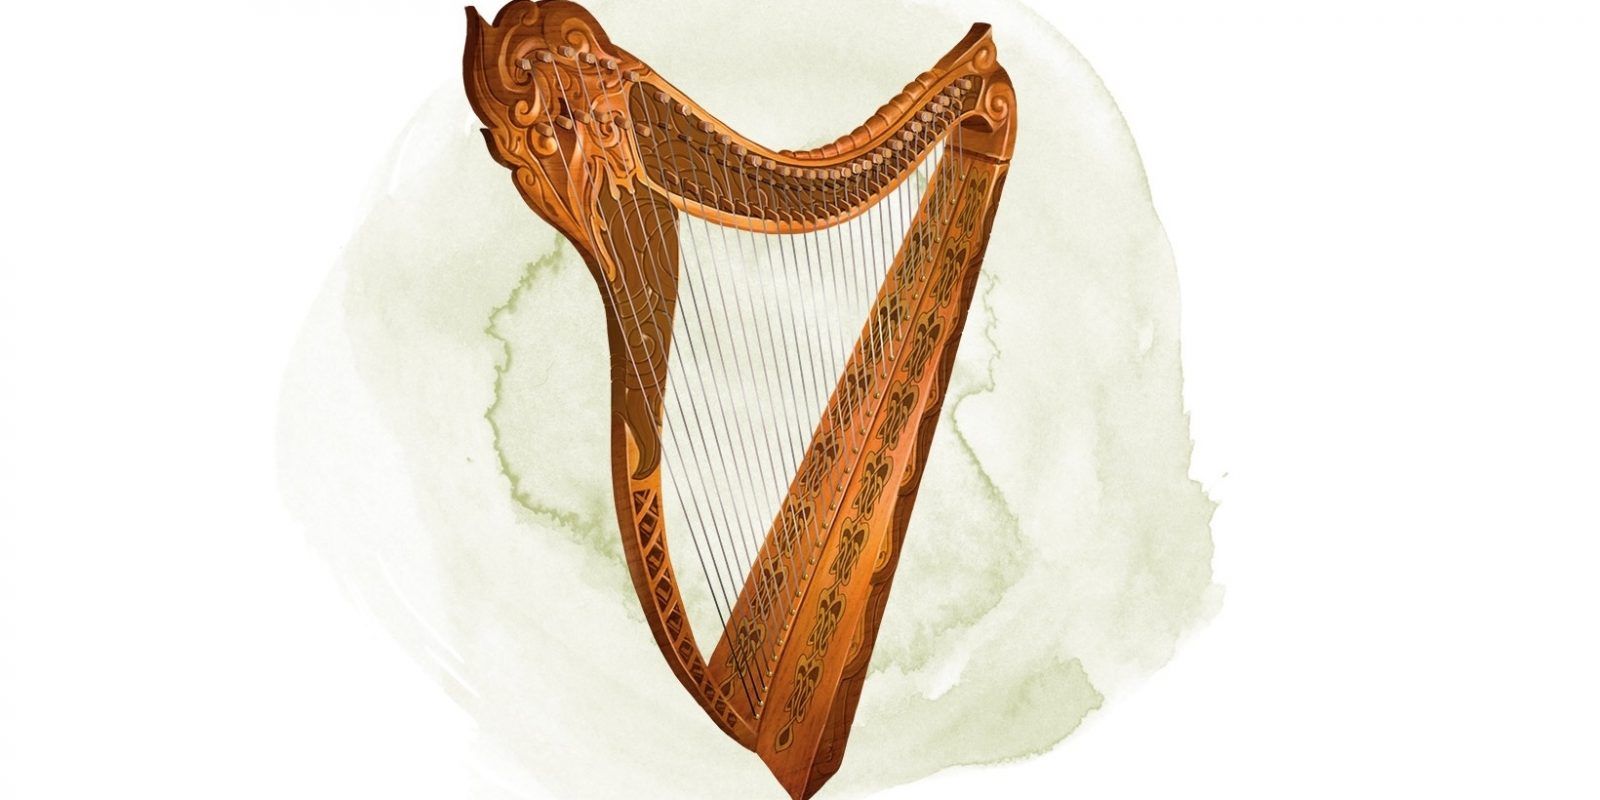 The image shows the Ollamh Harp from the DnD dungeon Master's Guide